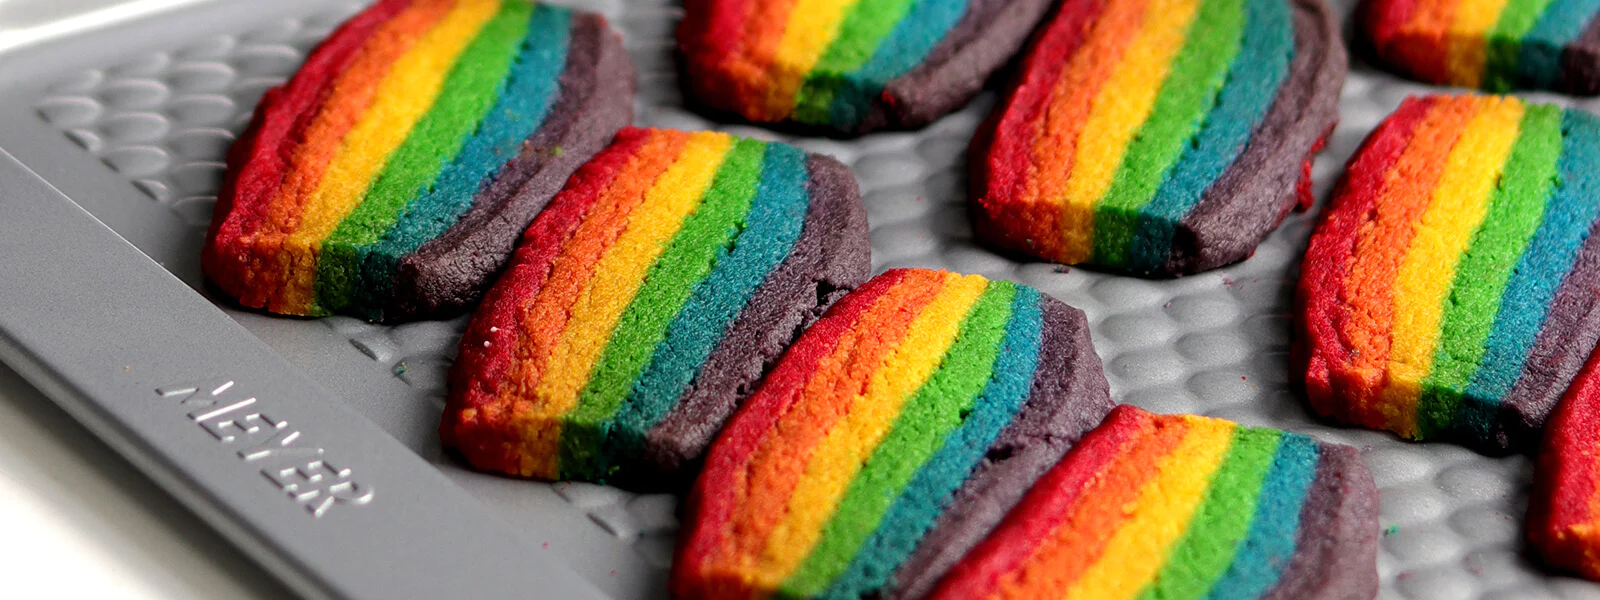 try-this-at-home-how-to-make-rainbow-cookies